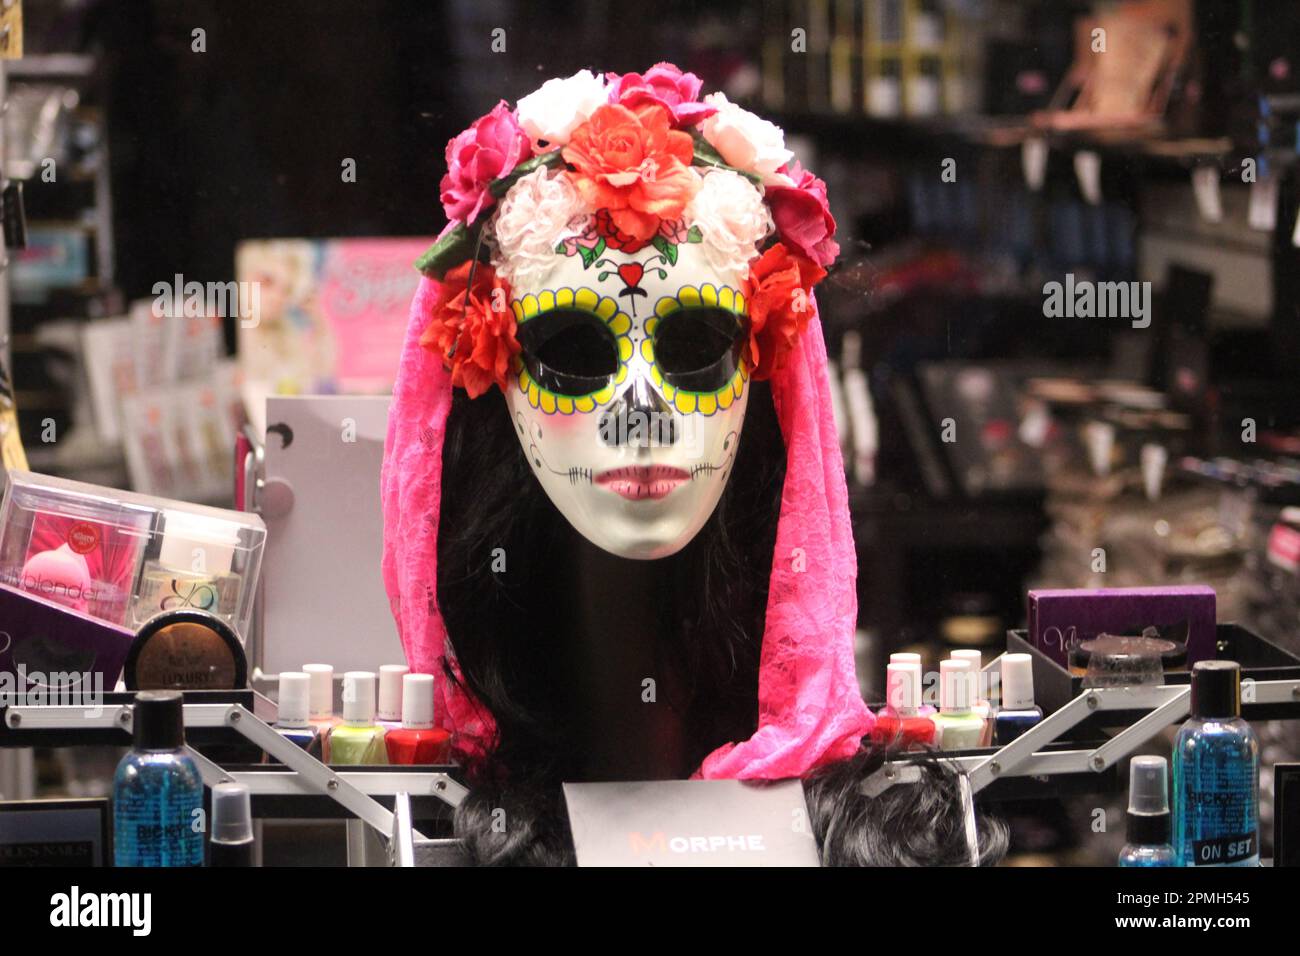 NEW YORK, USA - NOVEMBER 14, 2016 5th Avenue in the evening Day of the Dead mask in a shop window Stock Photo